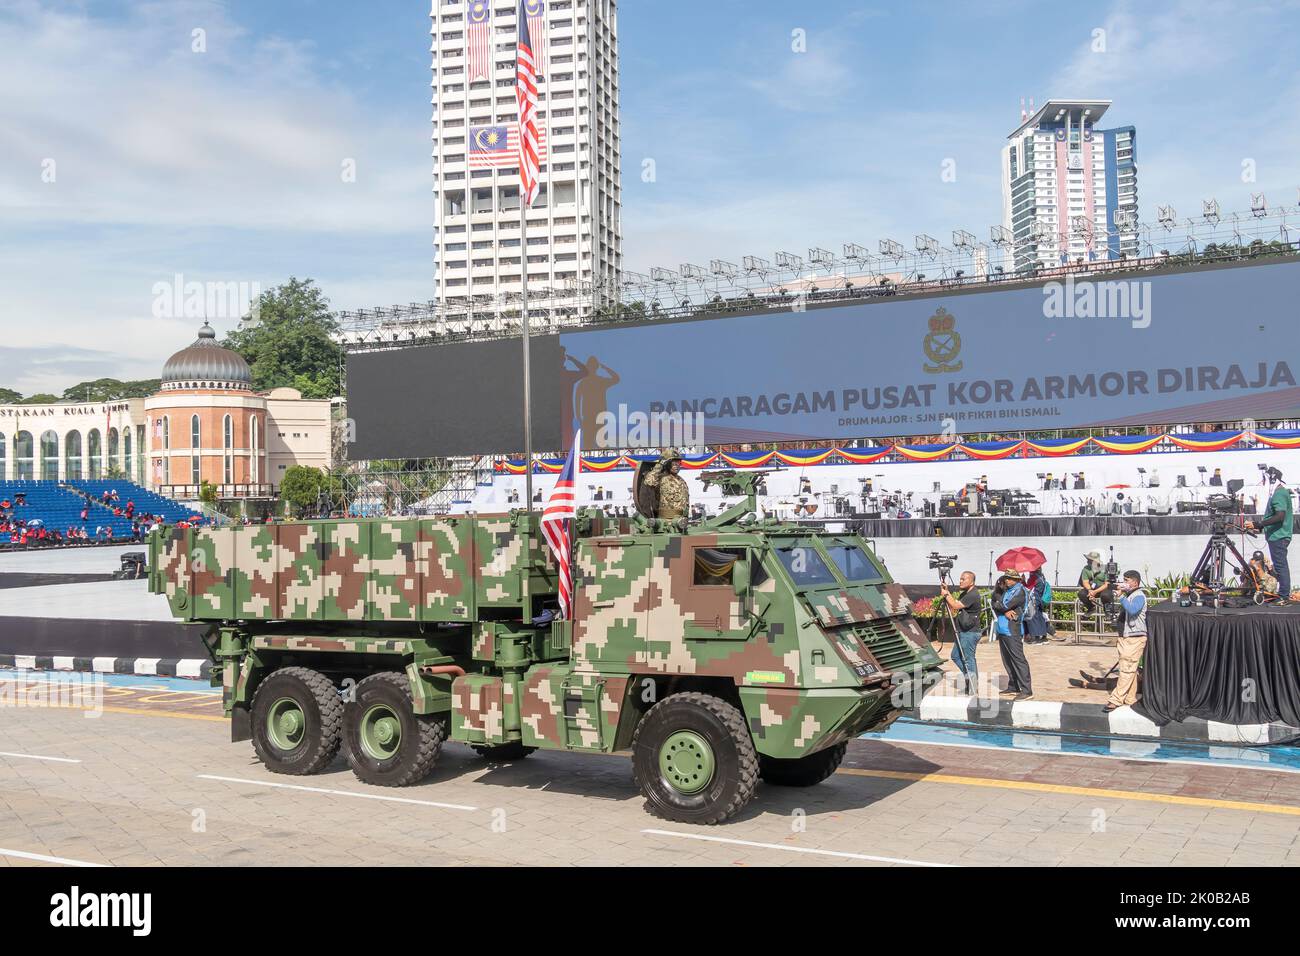 Malaysian Army's Astros 11 multiple launch rocket system mounted on Tectran VBT-2028 truck during 65th Malaysia National Day parade in Kuala Lumpur. Stock Photo